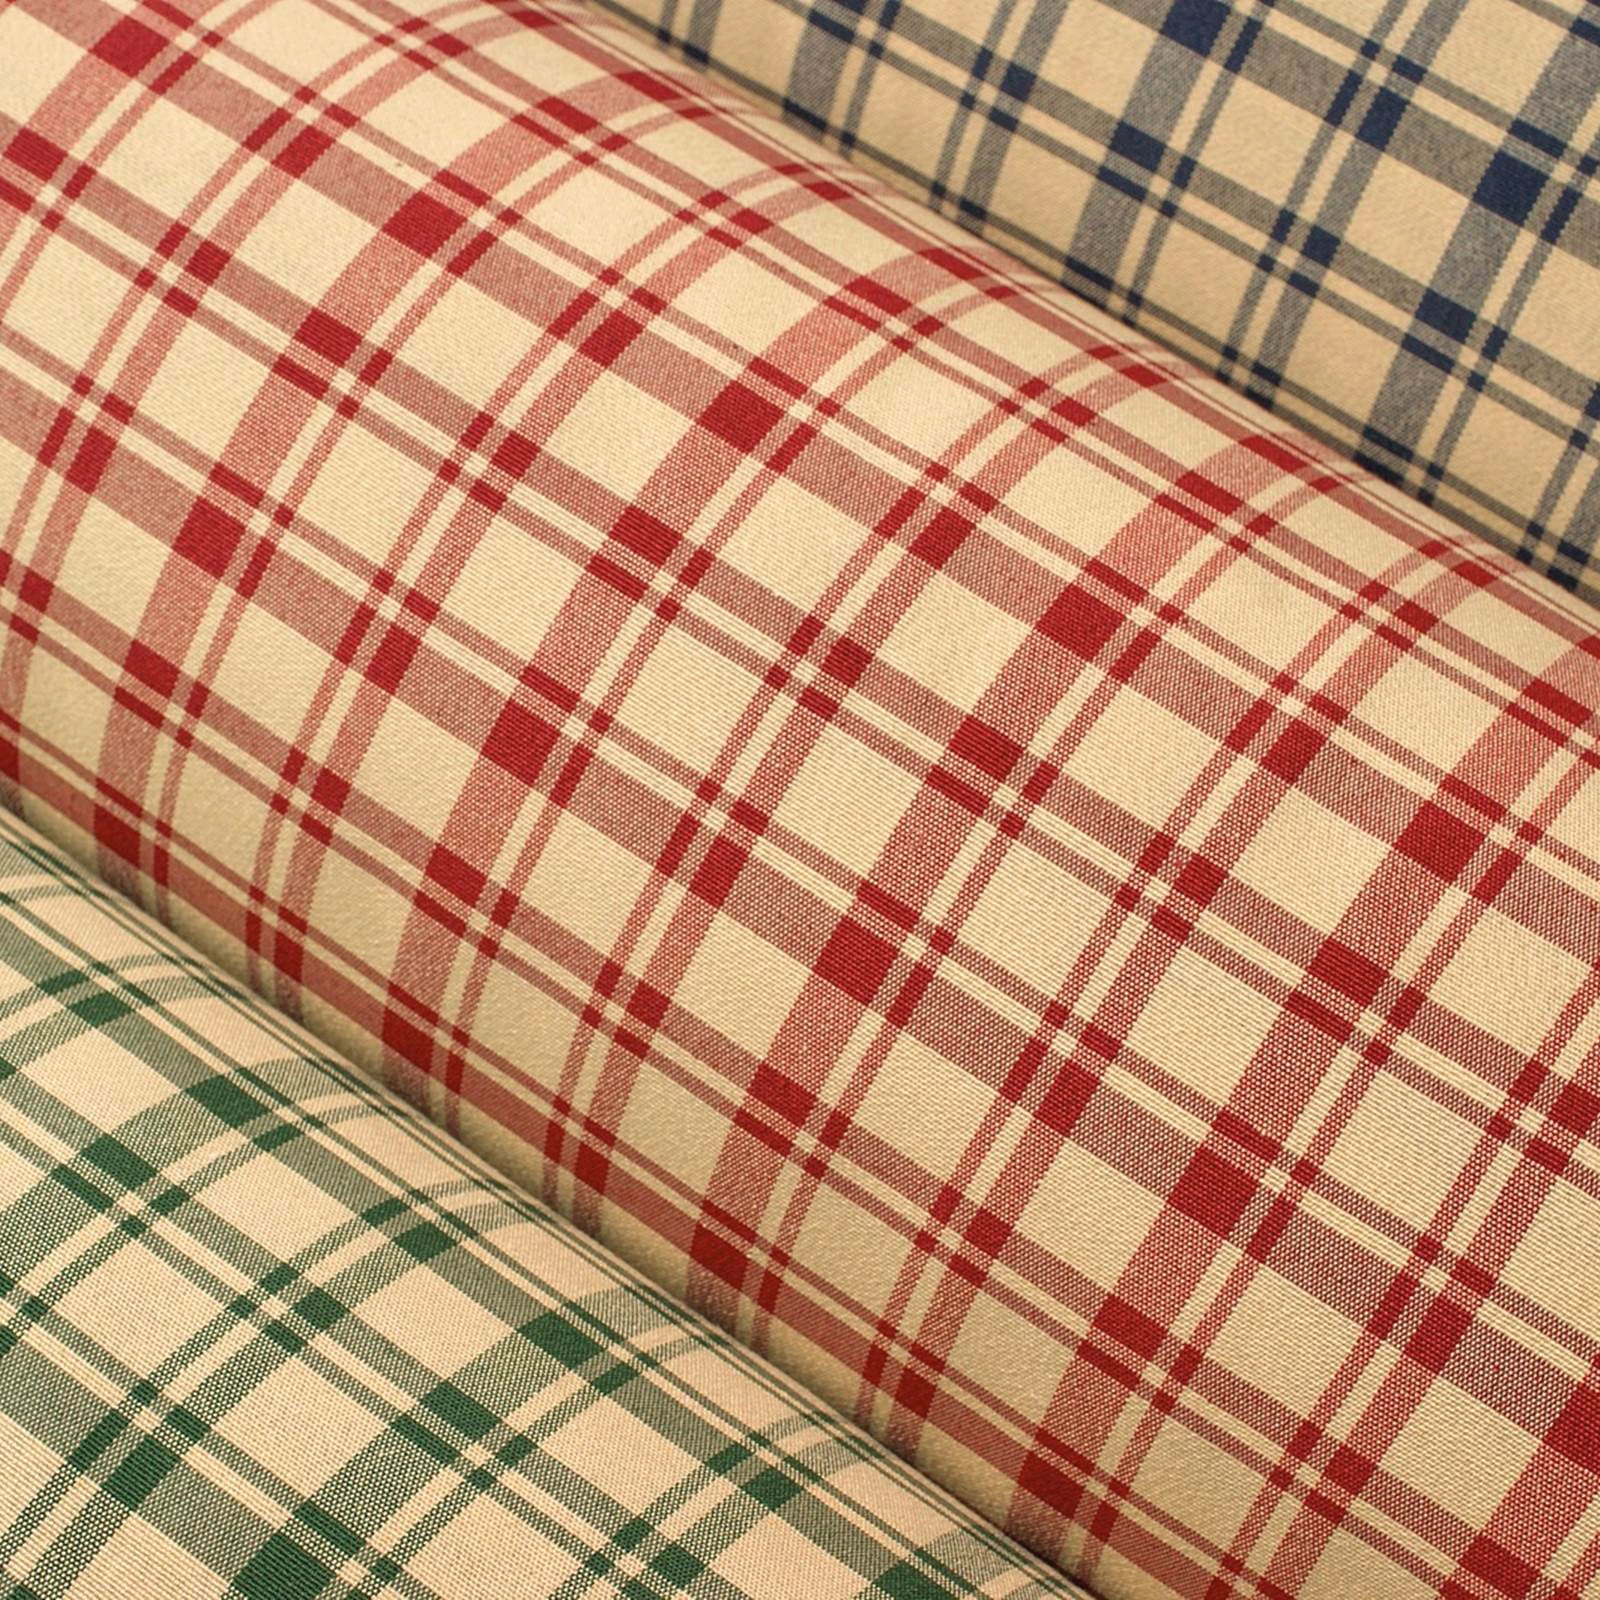 Cottage woven check - decorative fabric in extra width - 290cm wide